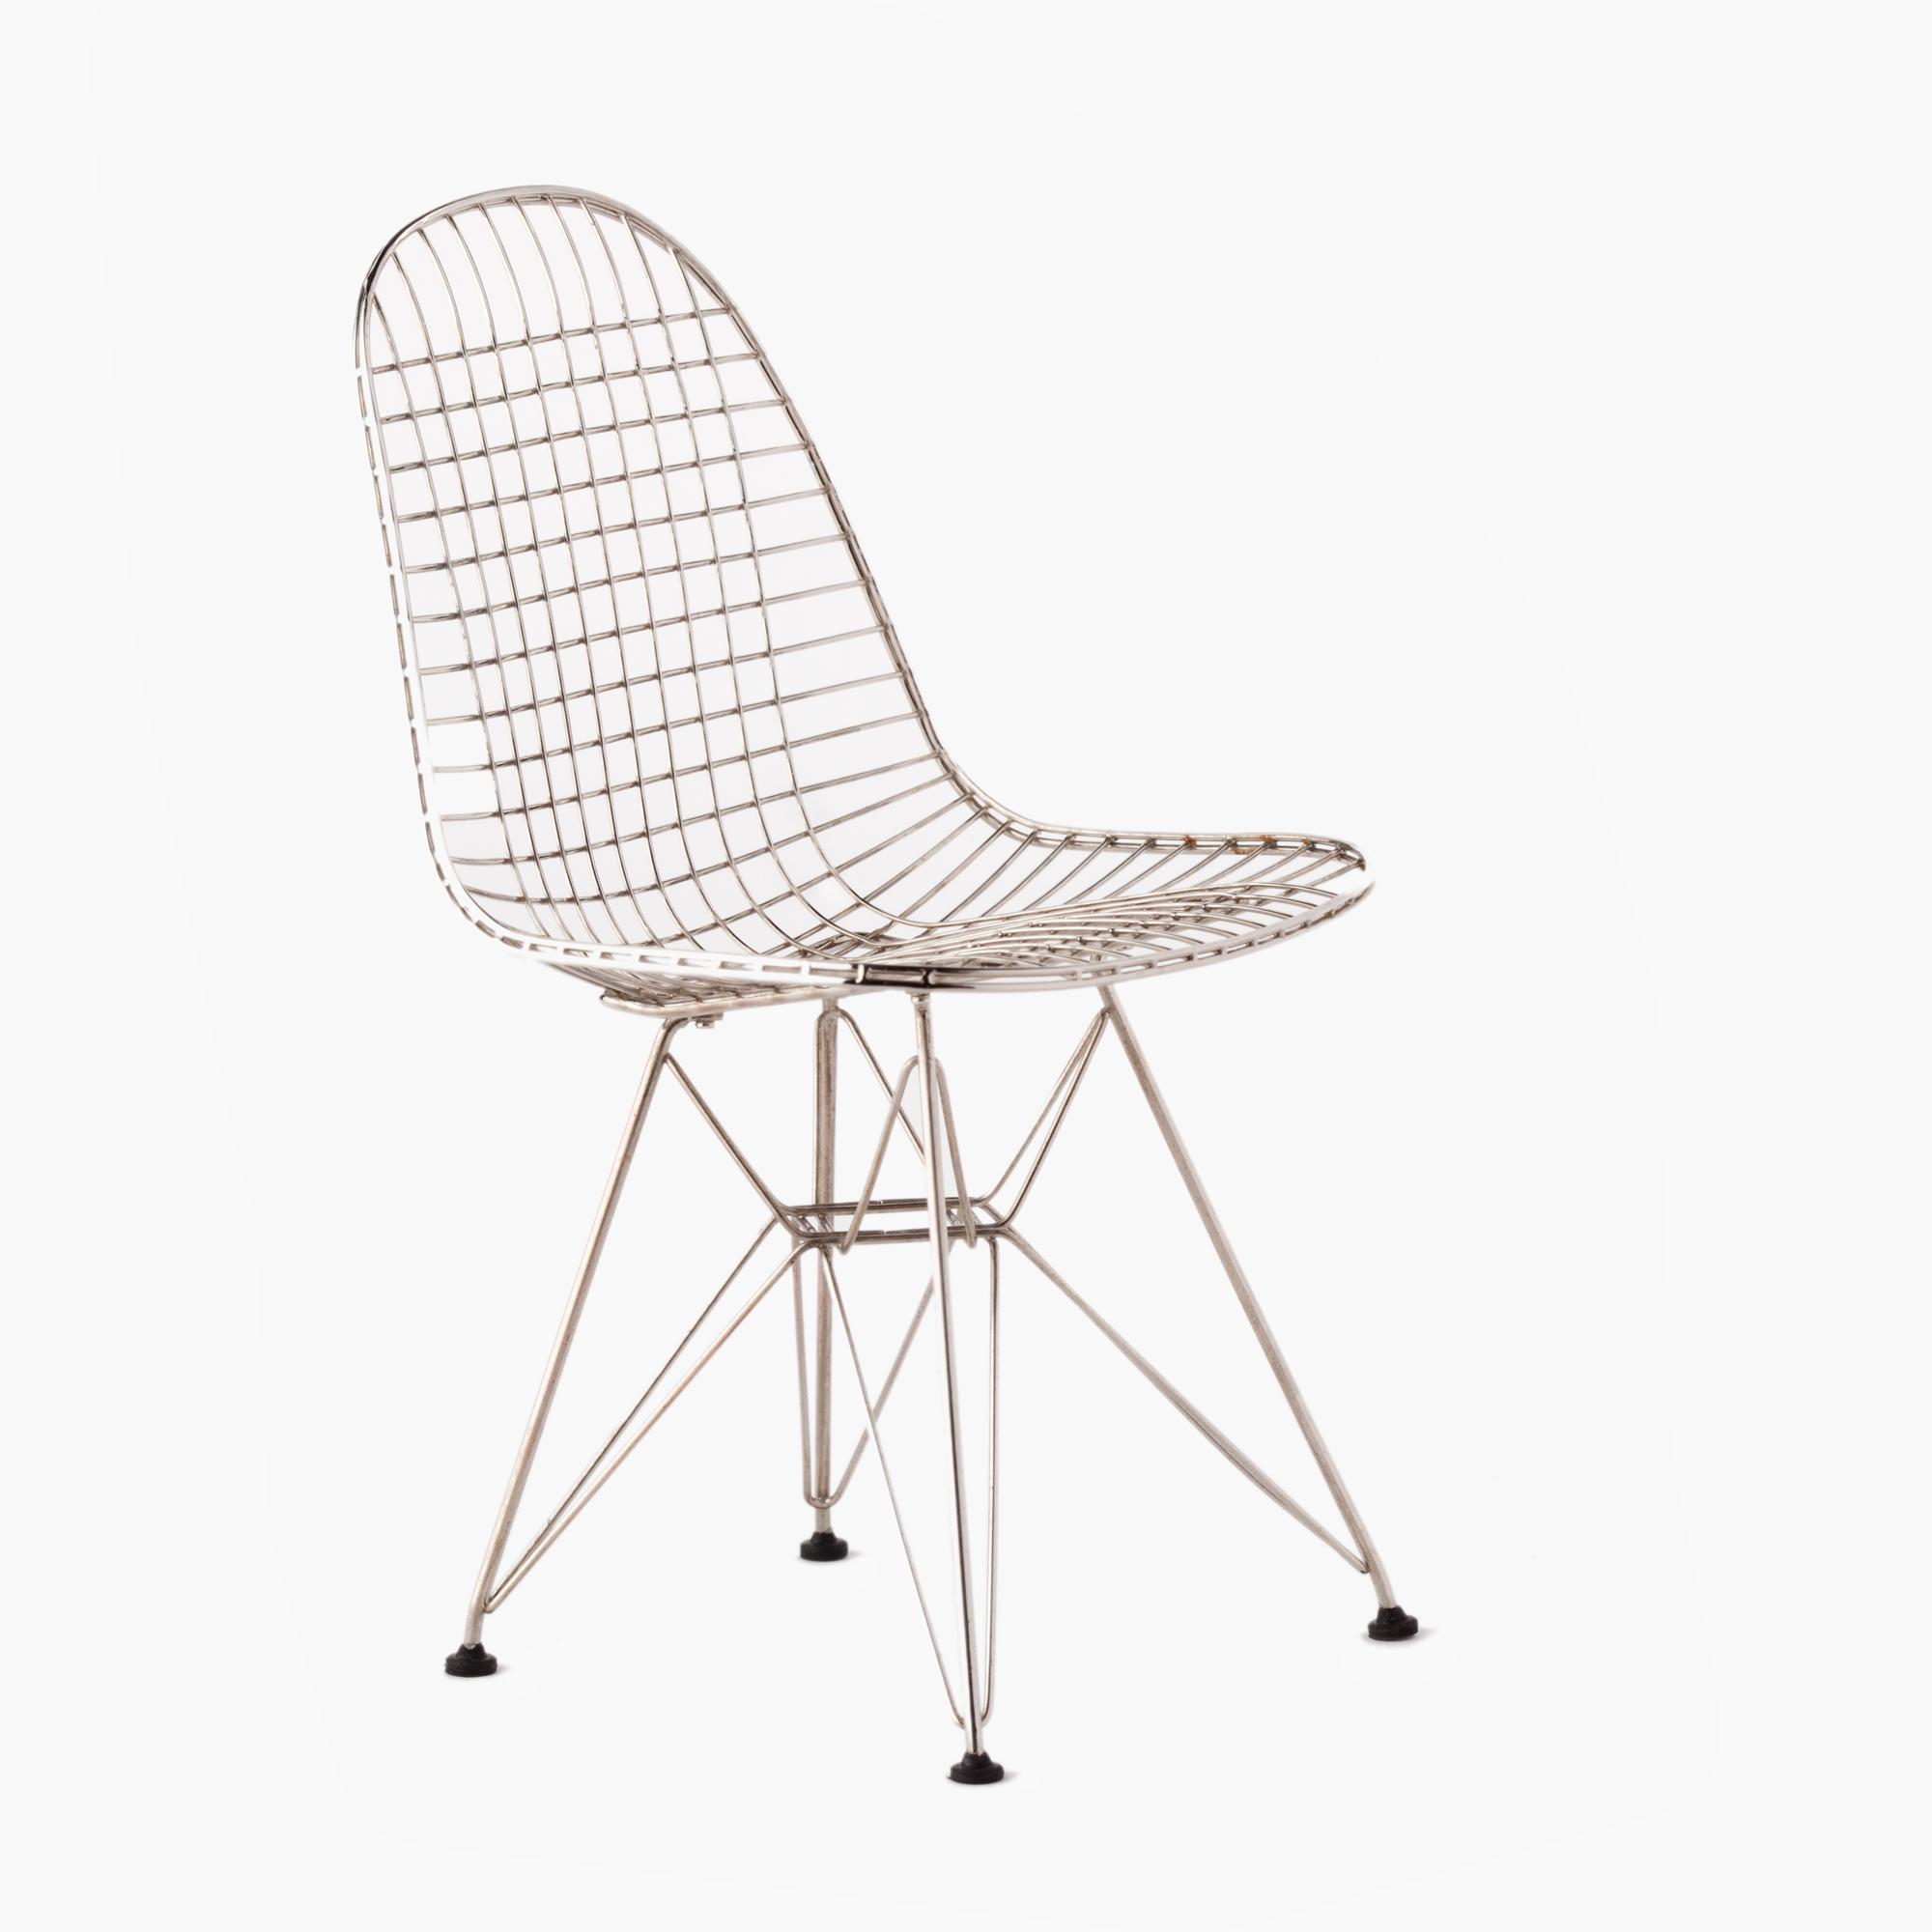 Silla miniatura DKR Wire, Charles & Ray Eames, 1951